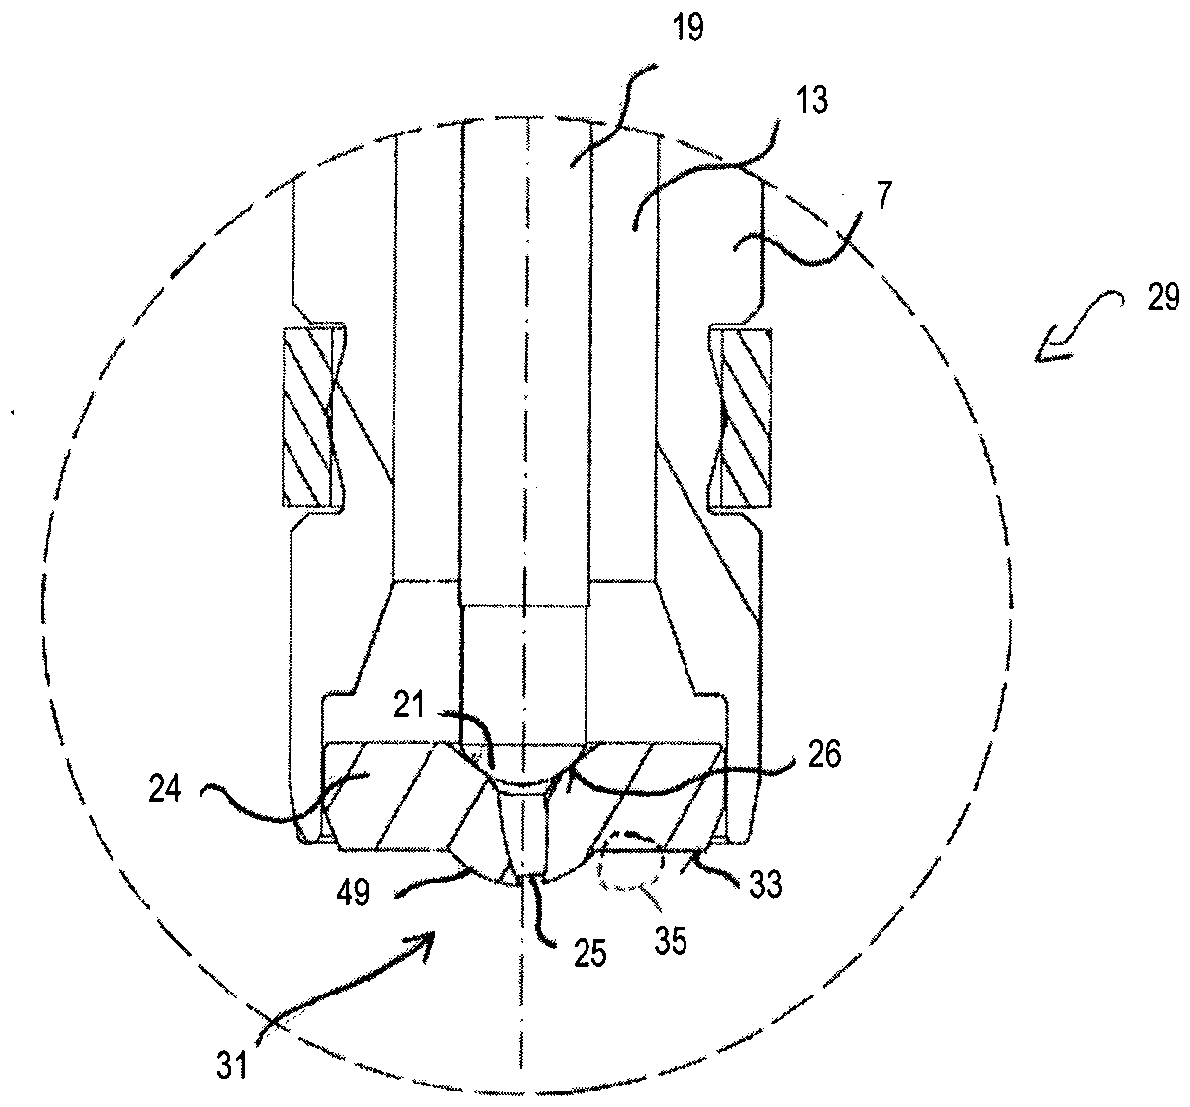 Fuel injection valves for combustion engines